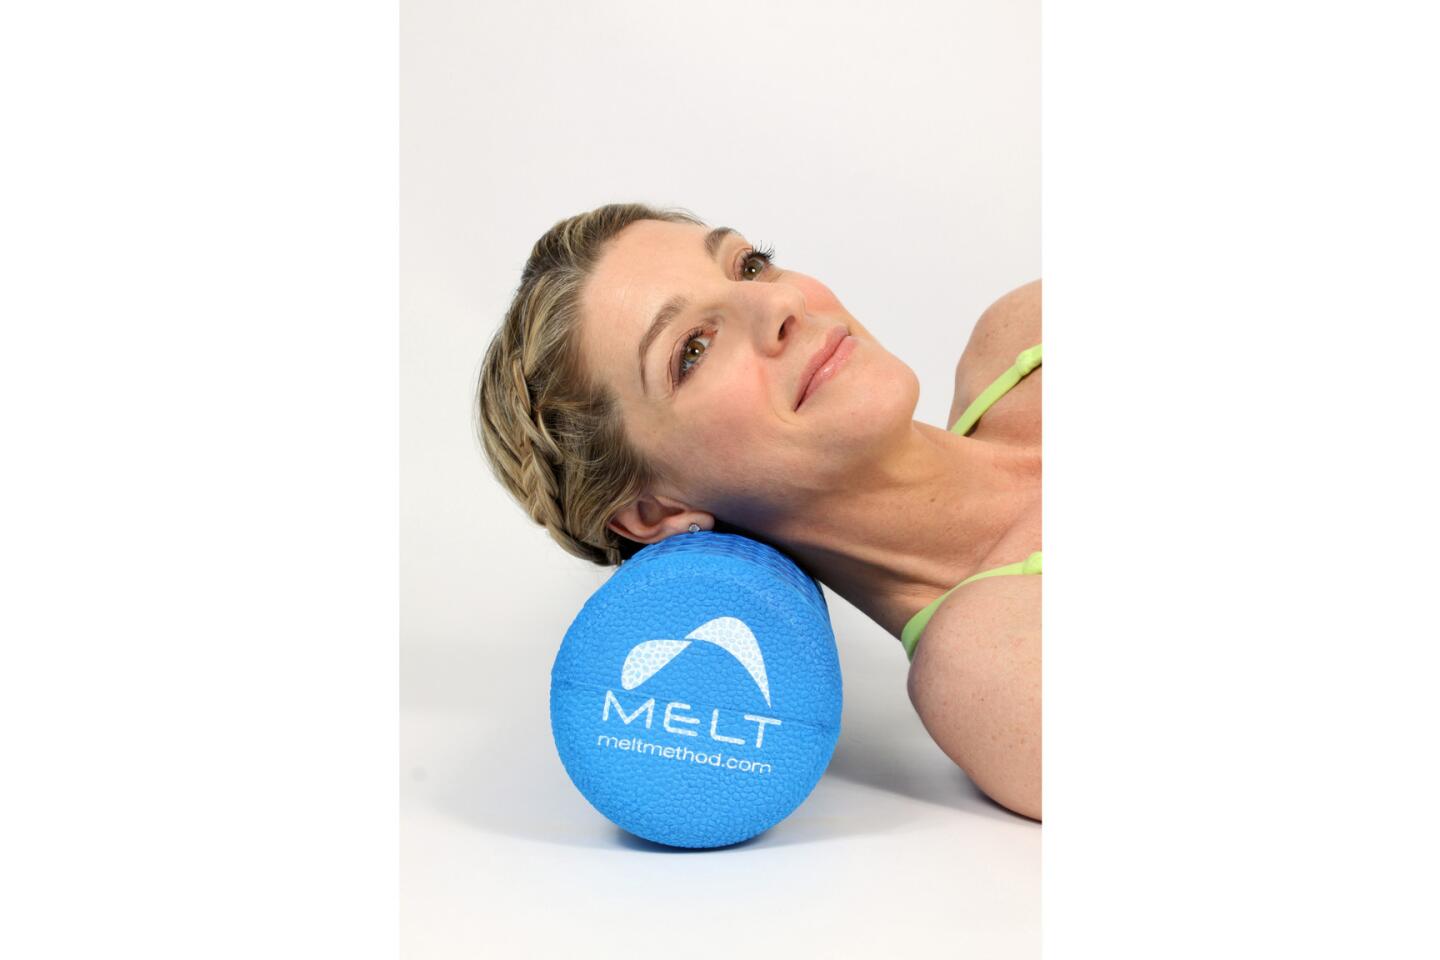 It doesn't have to hurt: How to use soft rollers and balls to gently melt  away aches and pains - Los Angeles Times